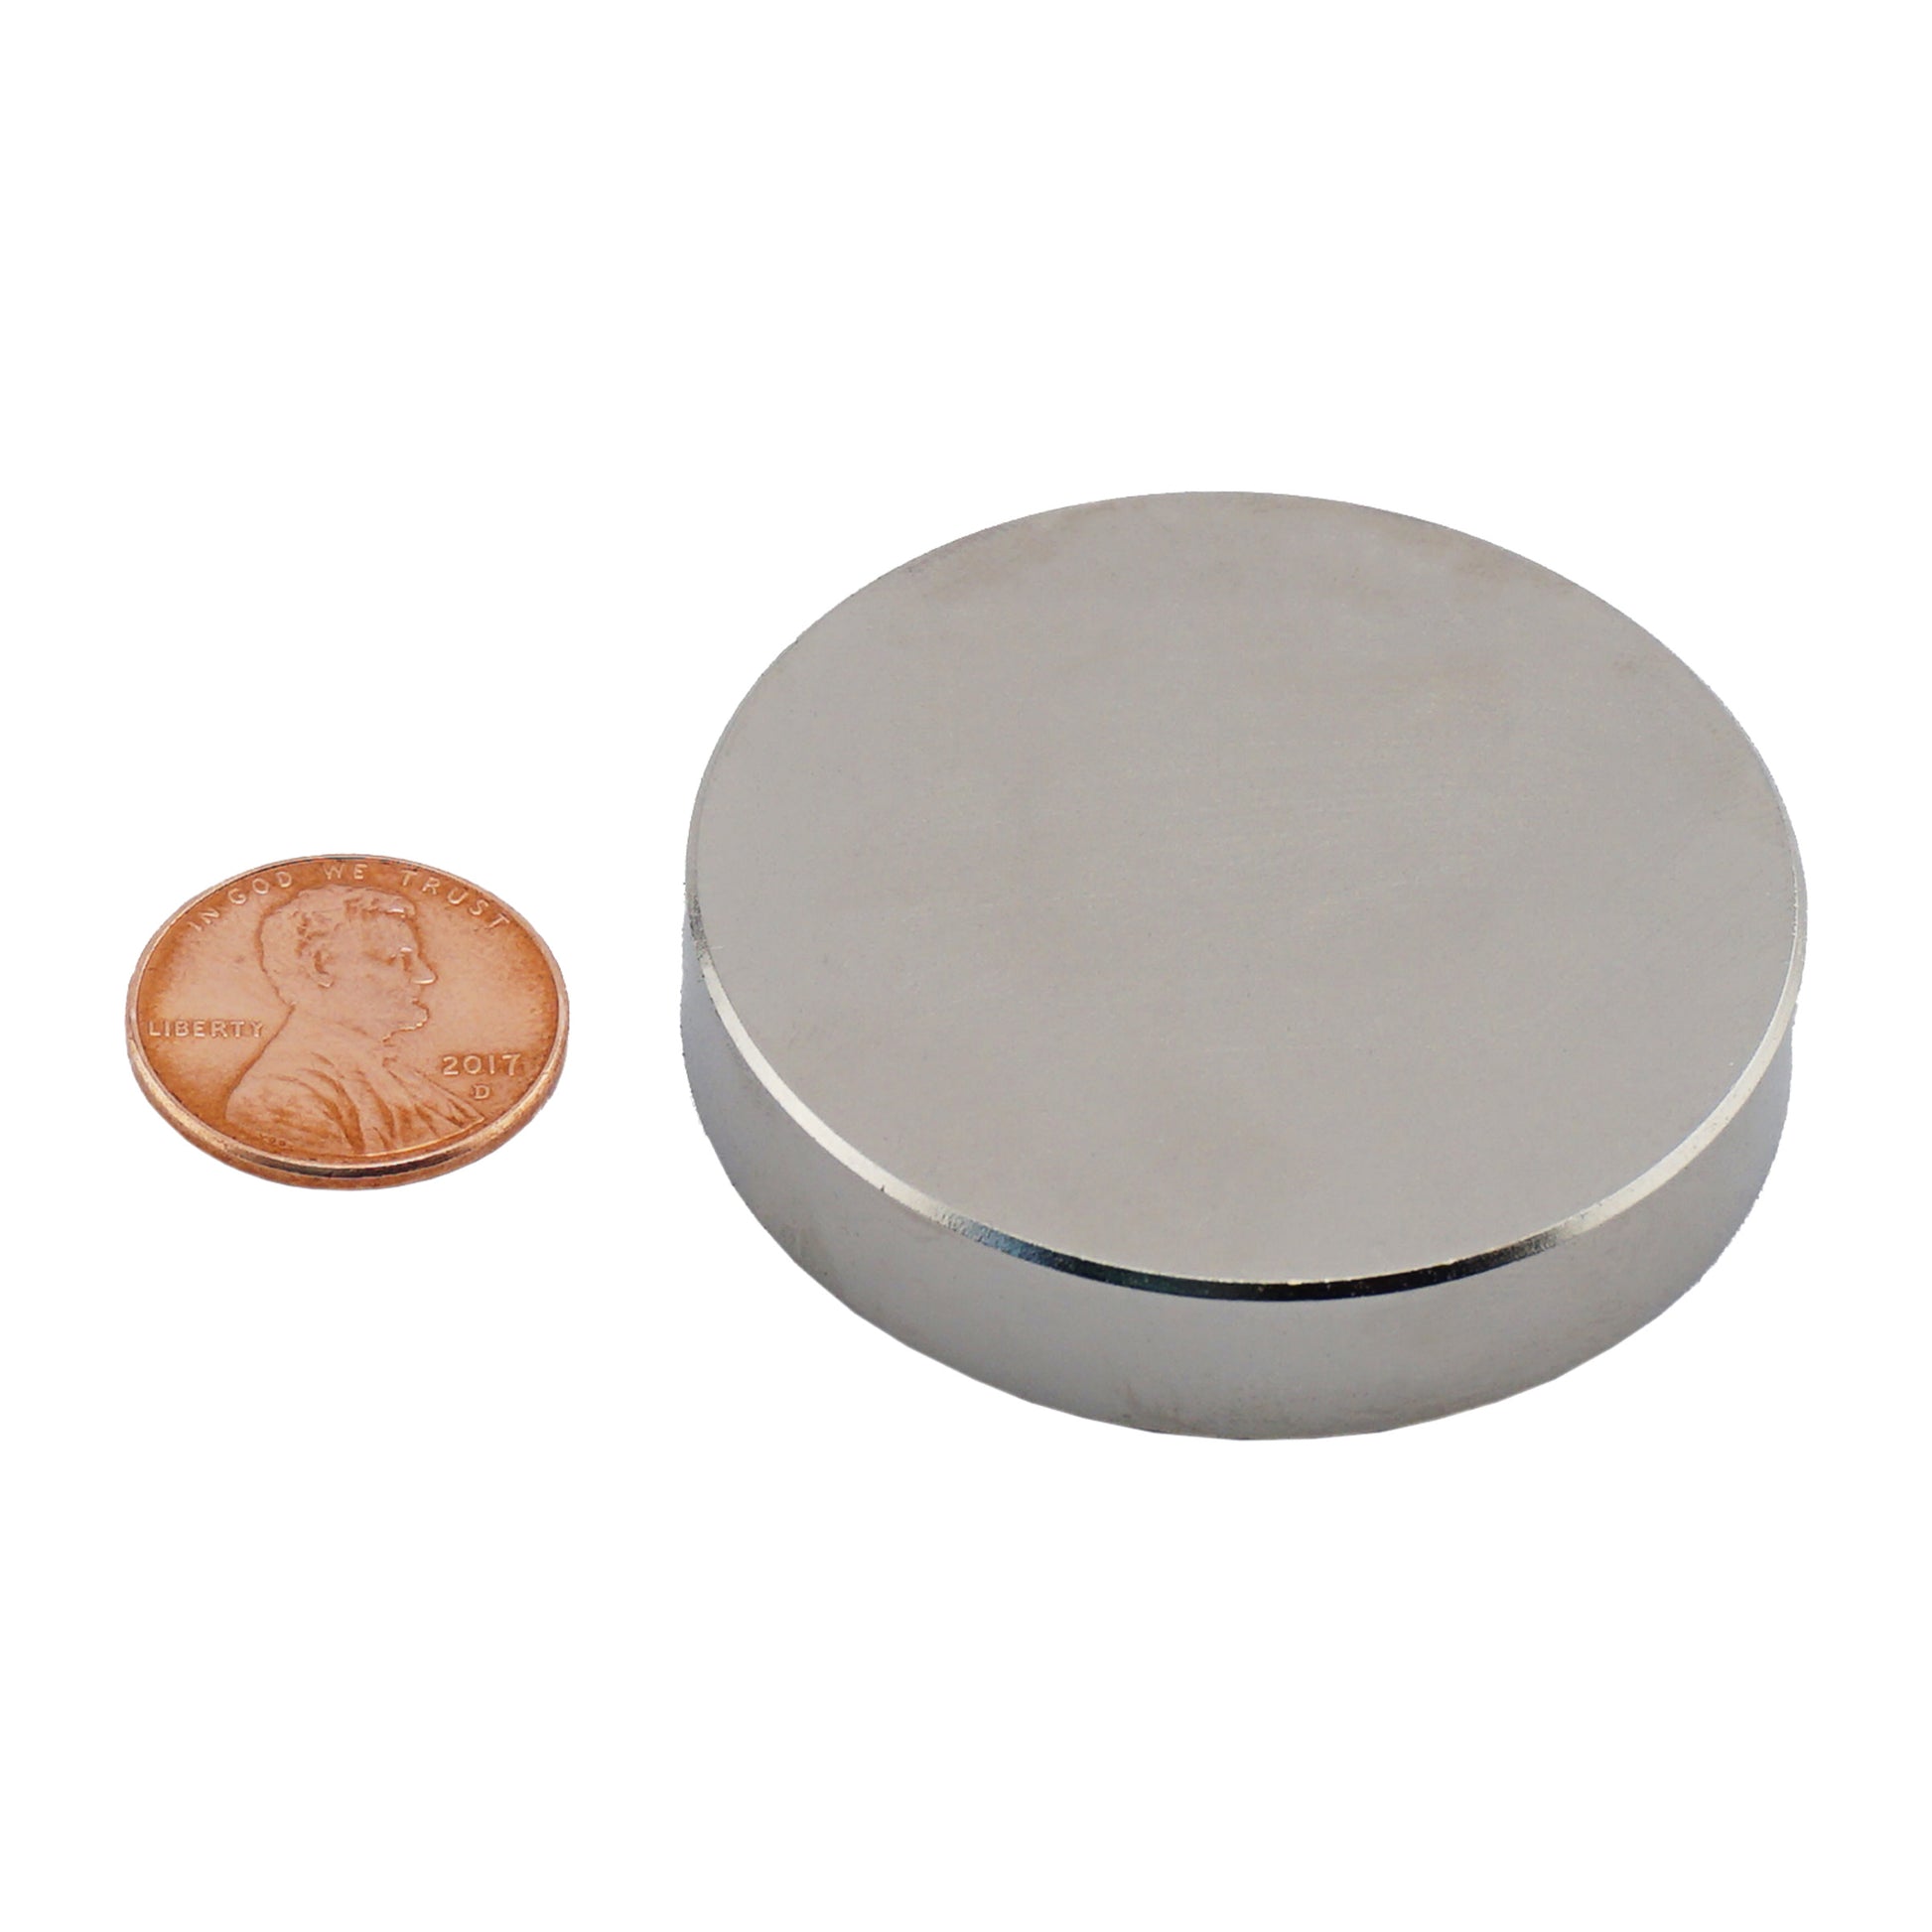 Load image into Gallery viewer, ND018703N Neodymium Disc Magnet - Compared to Penny for Size Reference